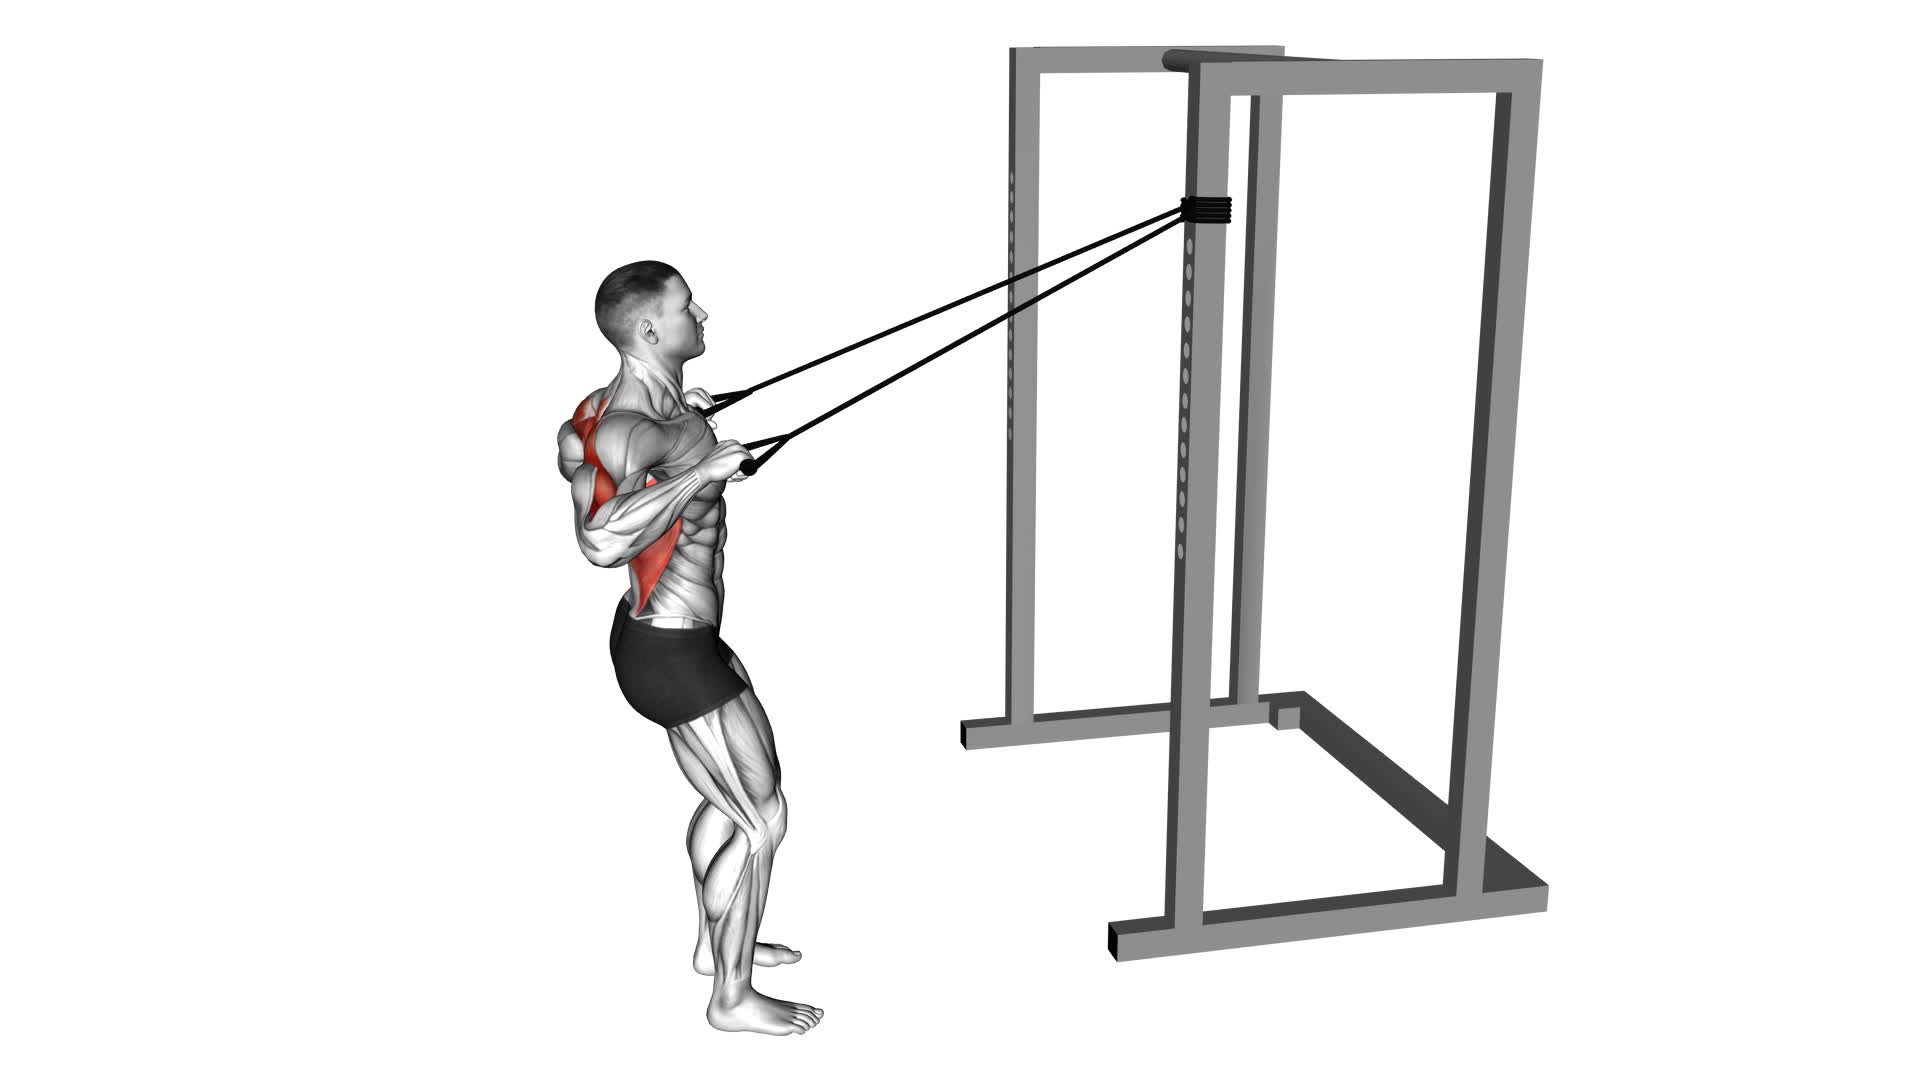 Band Narrow Grip High Row (VERSION 2) - Video Exercise Guide & Tips